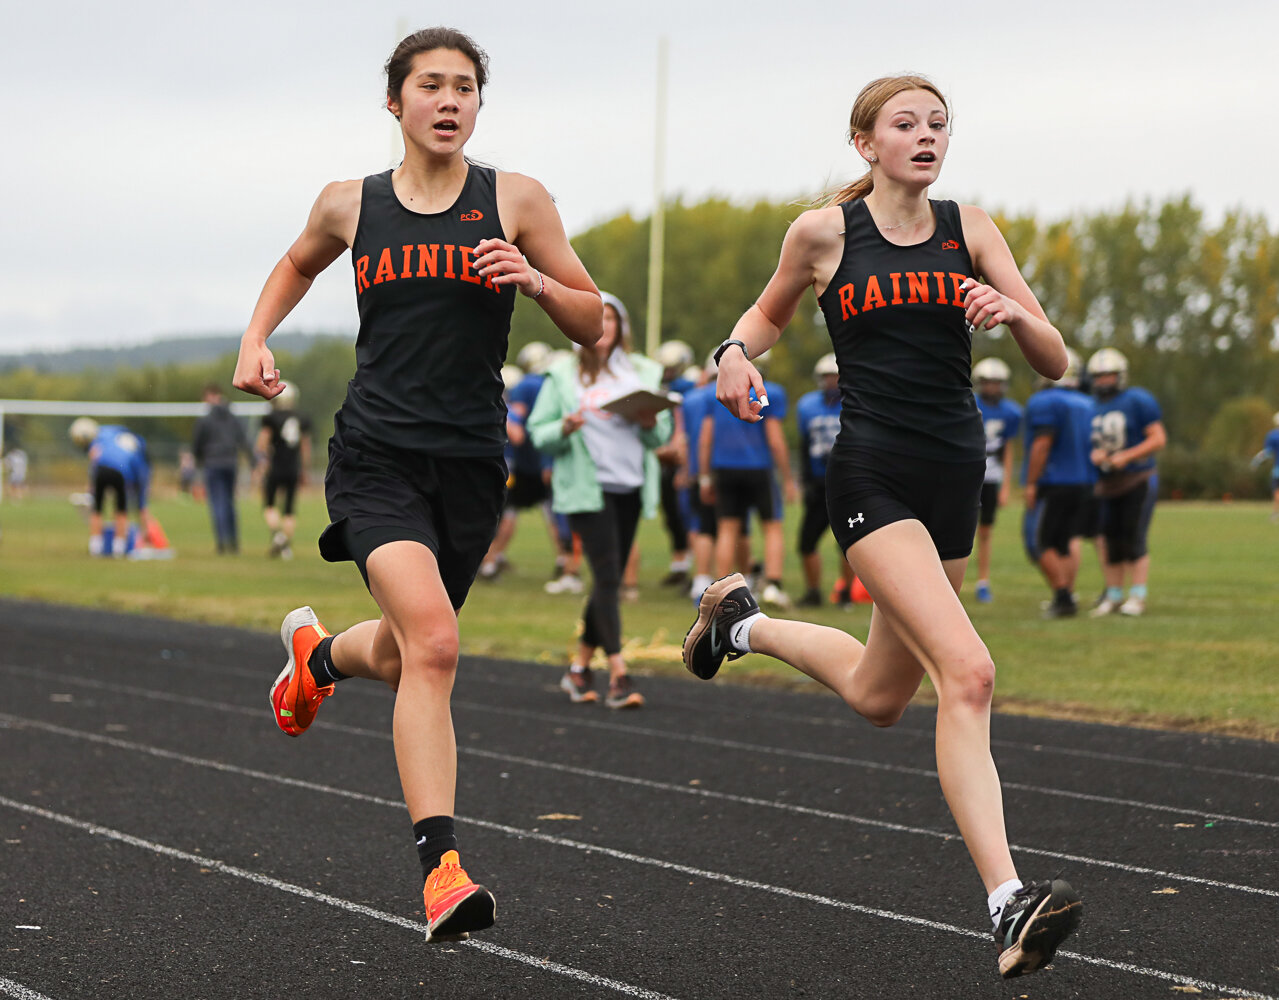 Angelica Askey (left) and Rayanna Wisner (right) come into the chute neck-and-neck in the girls race at a 2B cross country meet in Adna on Sept. 28. Wisner beat Askey by two-tenths of a second, but the two ended up finishing second and third, behind teammate Madison Ingram, who ran with the boys and finished a minute and-a-half faster in the boys' race.